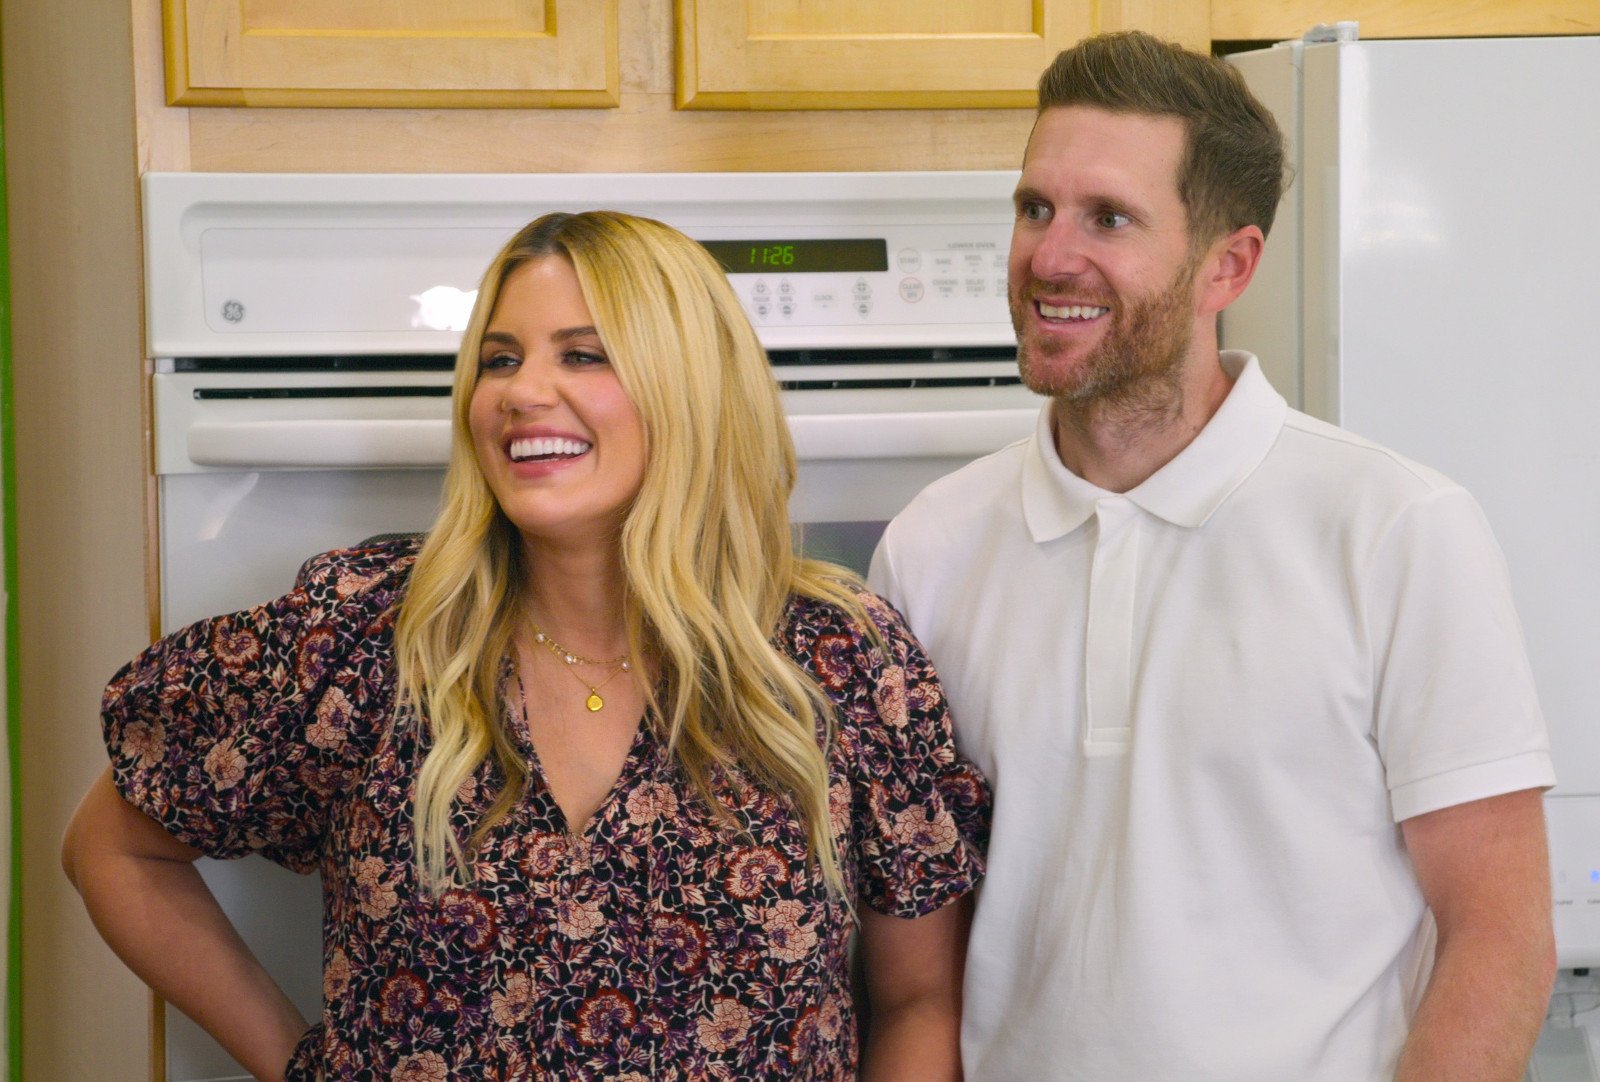 Shea 0and Syd McGee in 'Dream Home Makeover' for our article about season 4. They're standing in front of cabinets and an oven and smiling.